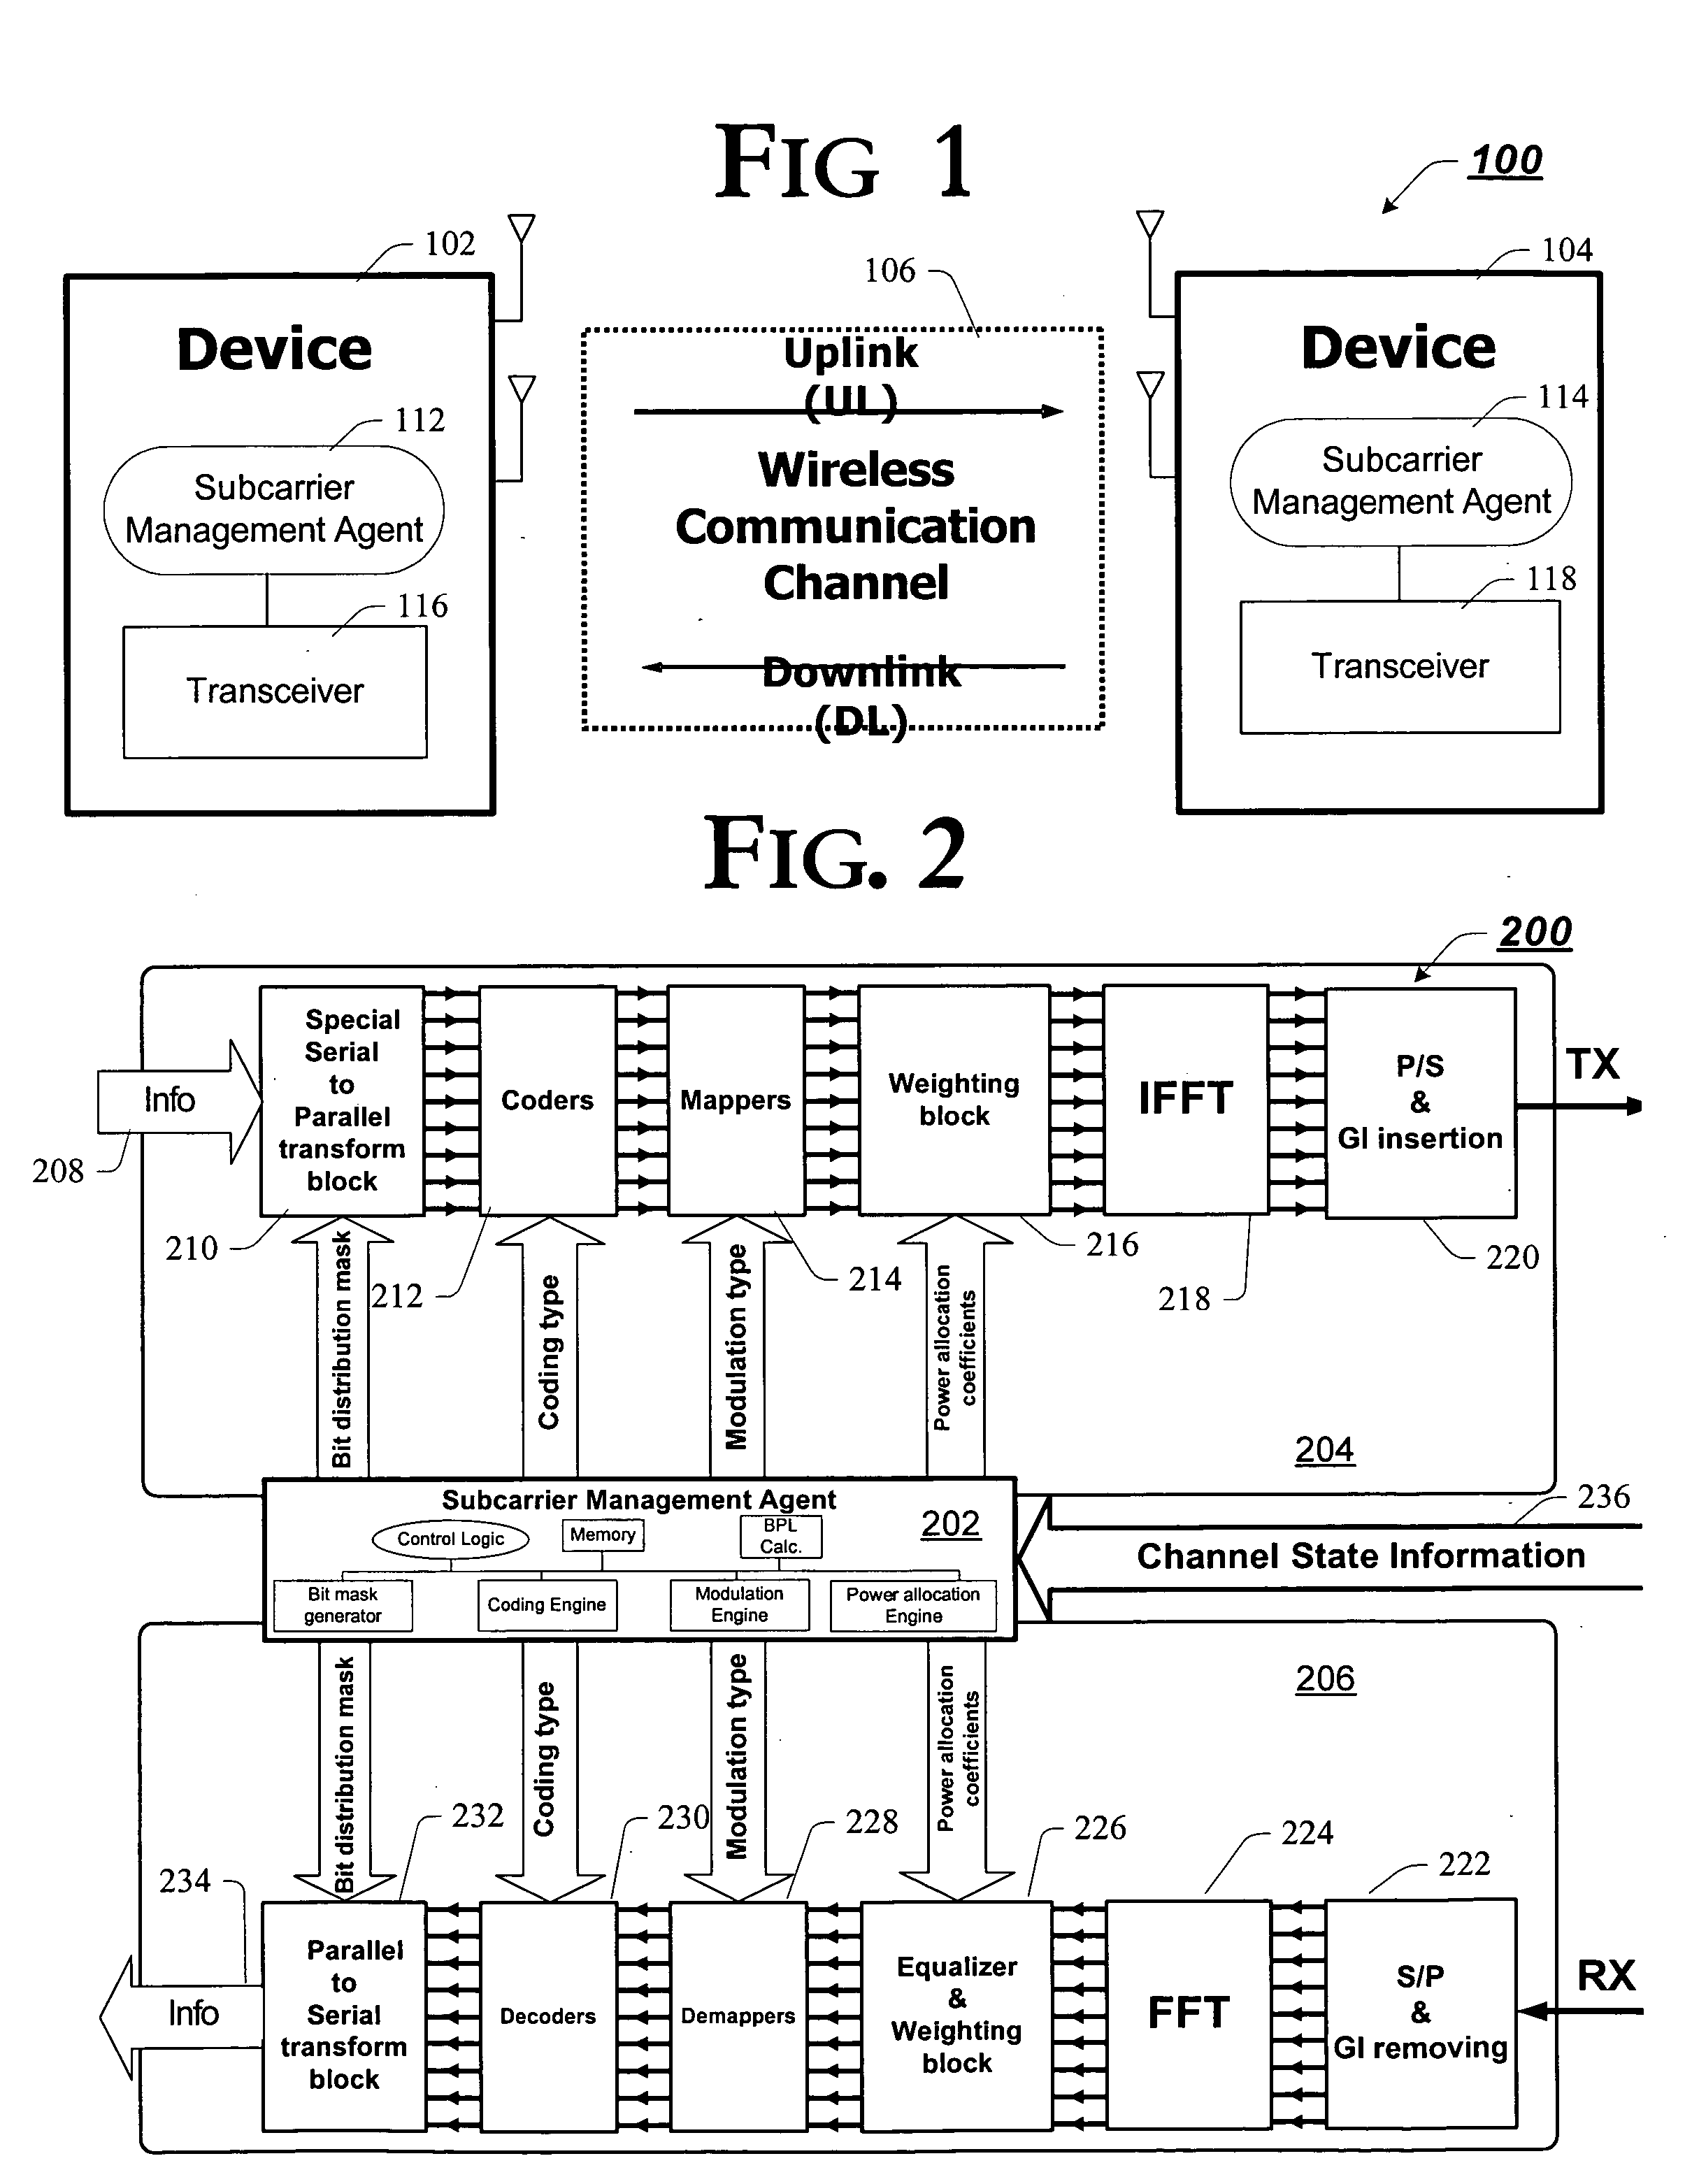 Adaptive multicarrier wireless communication system, apparatus and associated methods